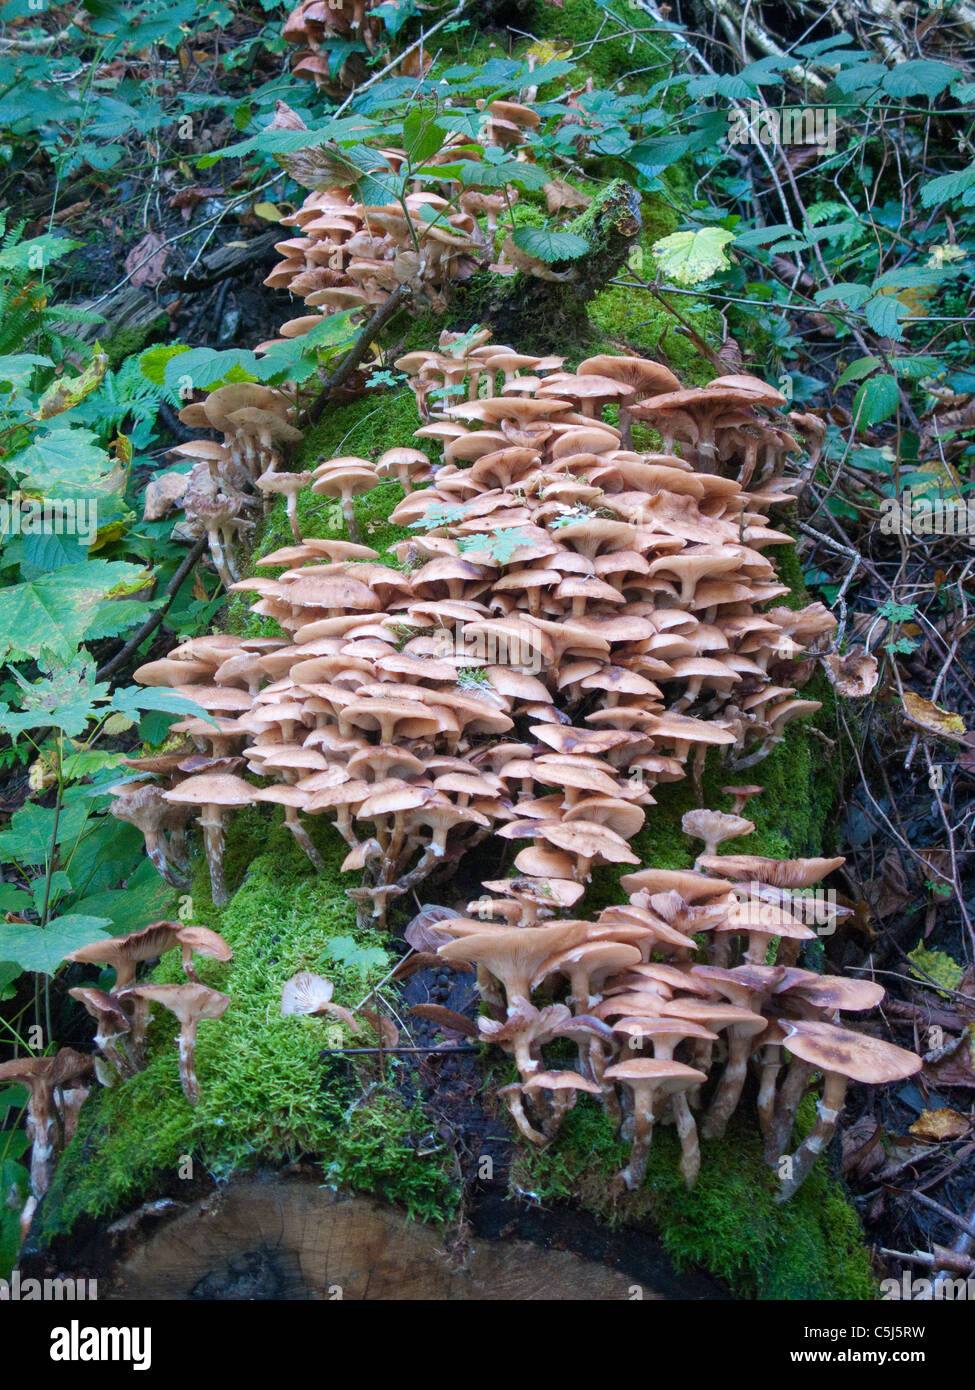 Wildwachsende Pilze im Wald bei Traben-Trarbach, Mosel, Wild growing mushrooms in the forest of Traben-Trarbach, Moselle, Stock Photo